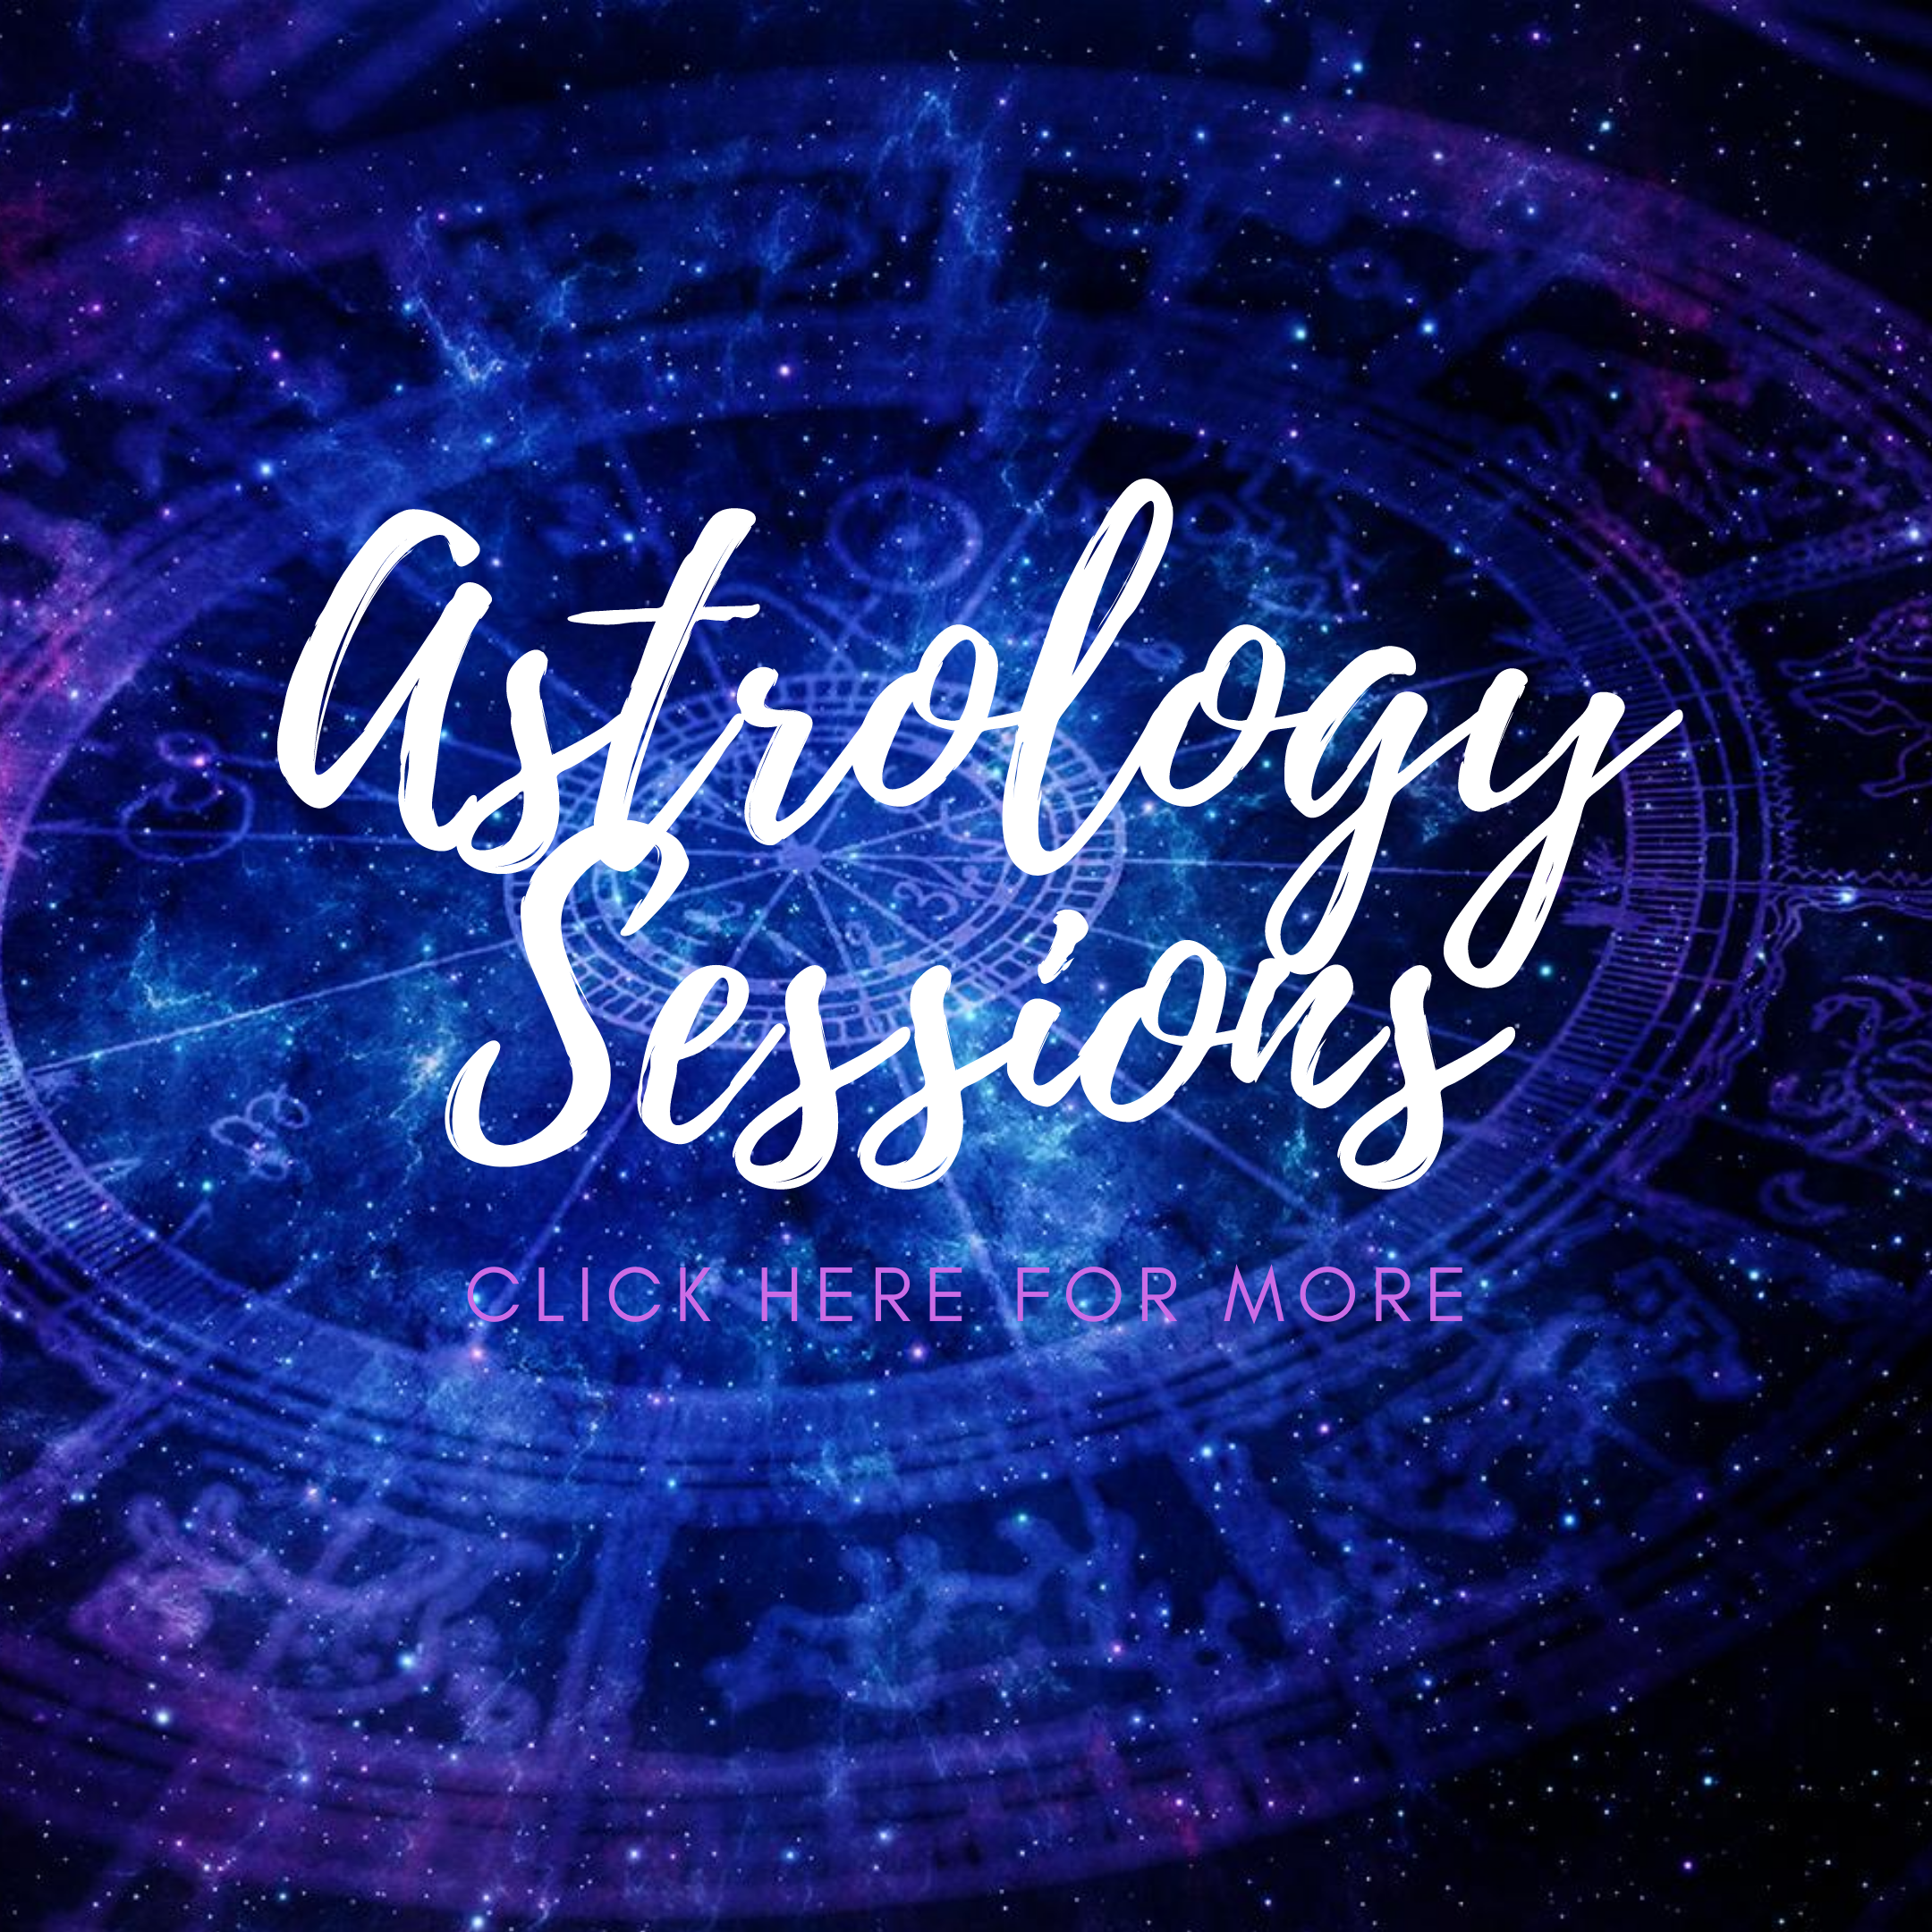 Astrology Sessions